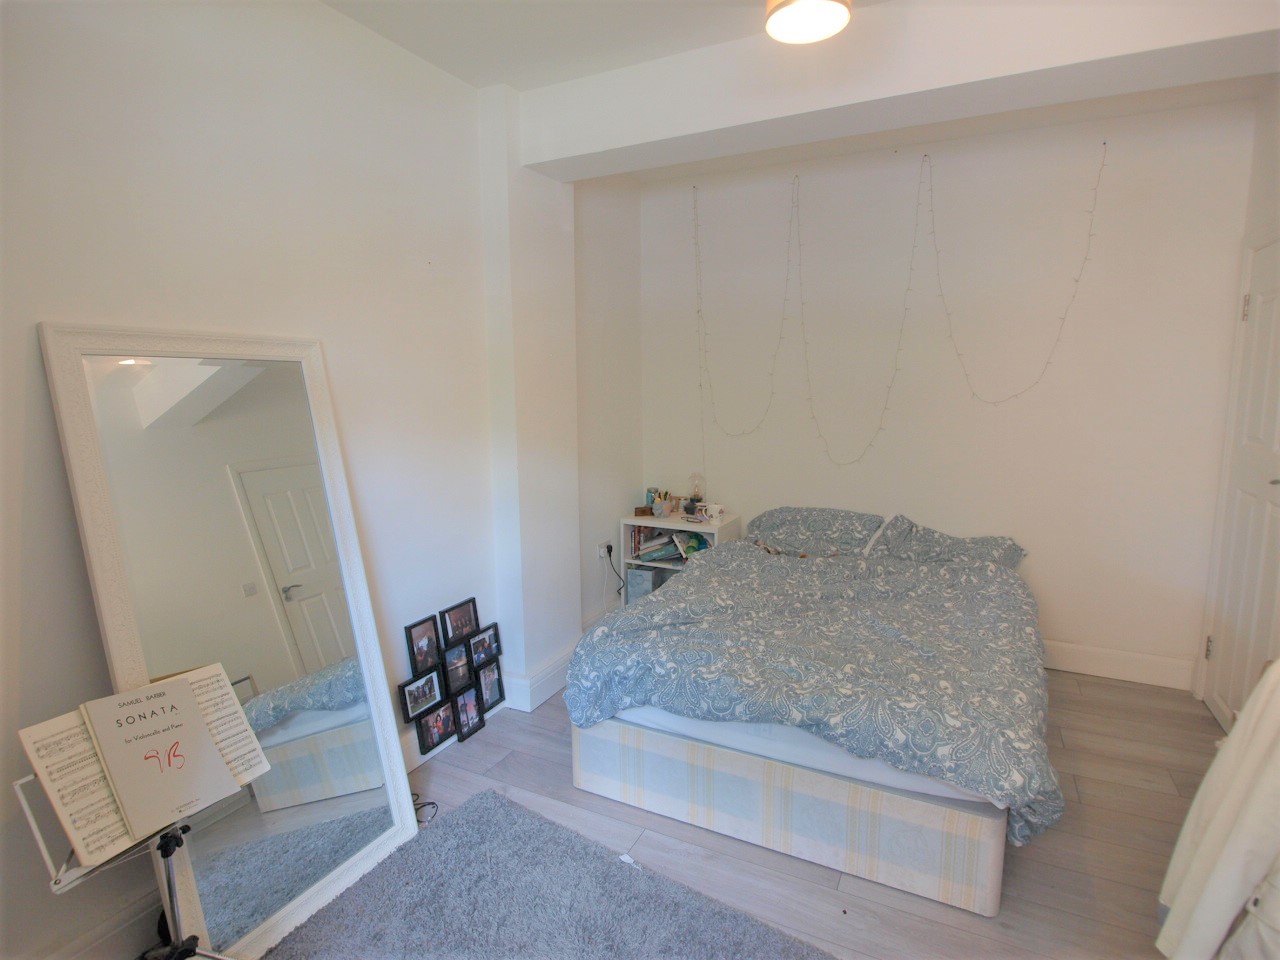 4 bedrooms flat, 36 New North Road Old Street London